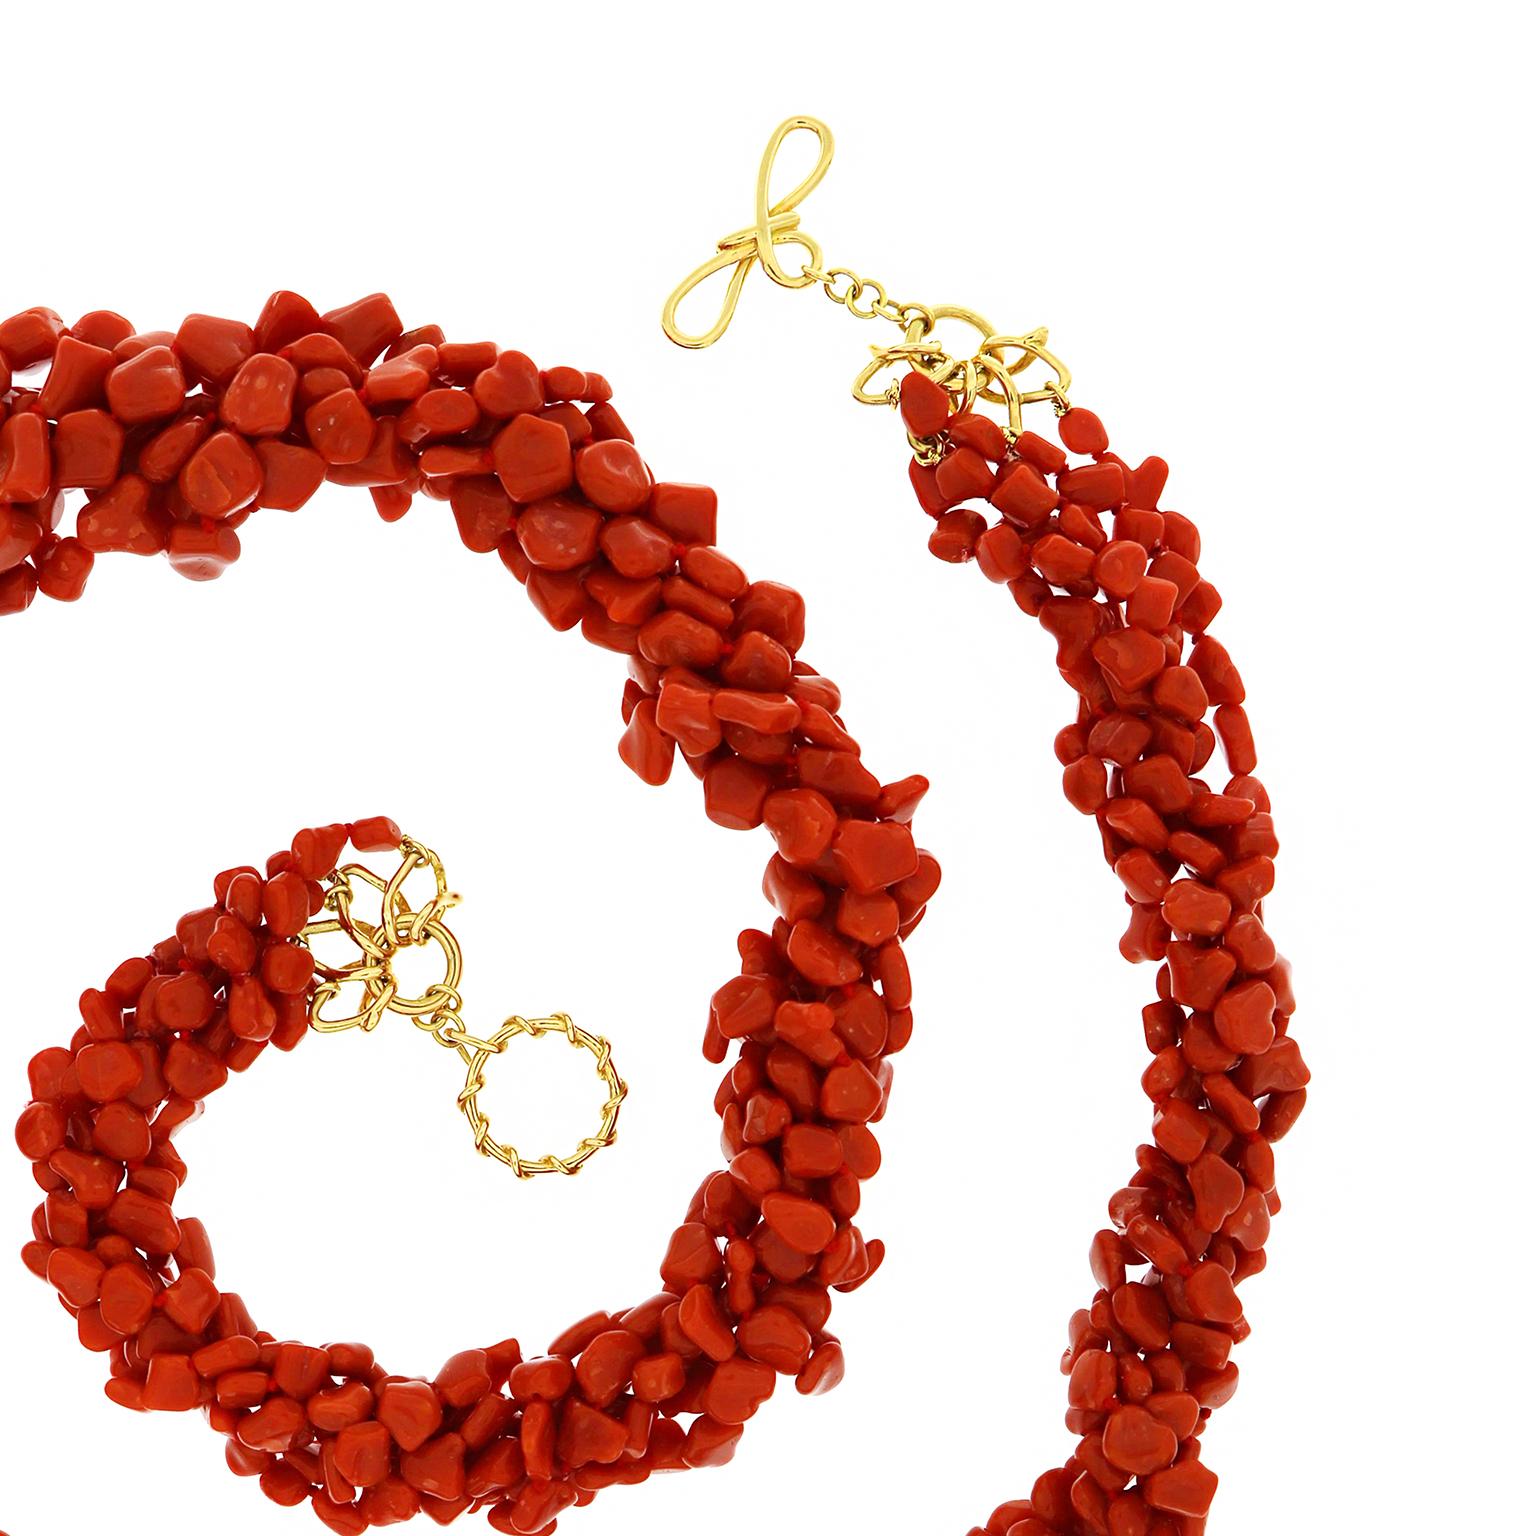 Bead Valentin Magro Multi Strand Sardinian Red Coral Nugget Necklace